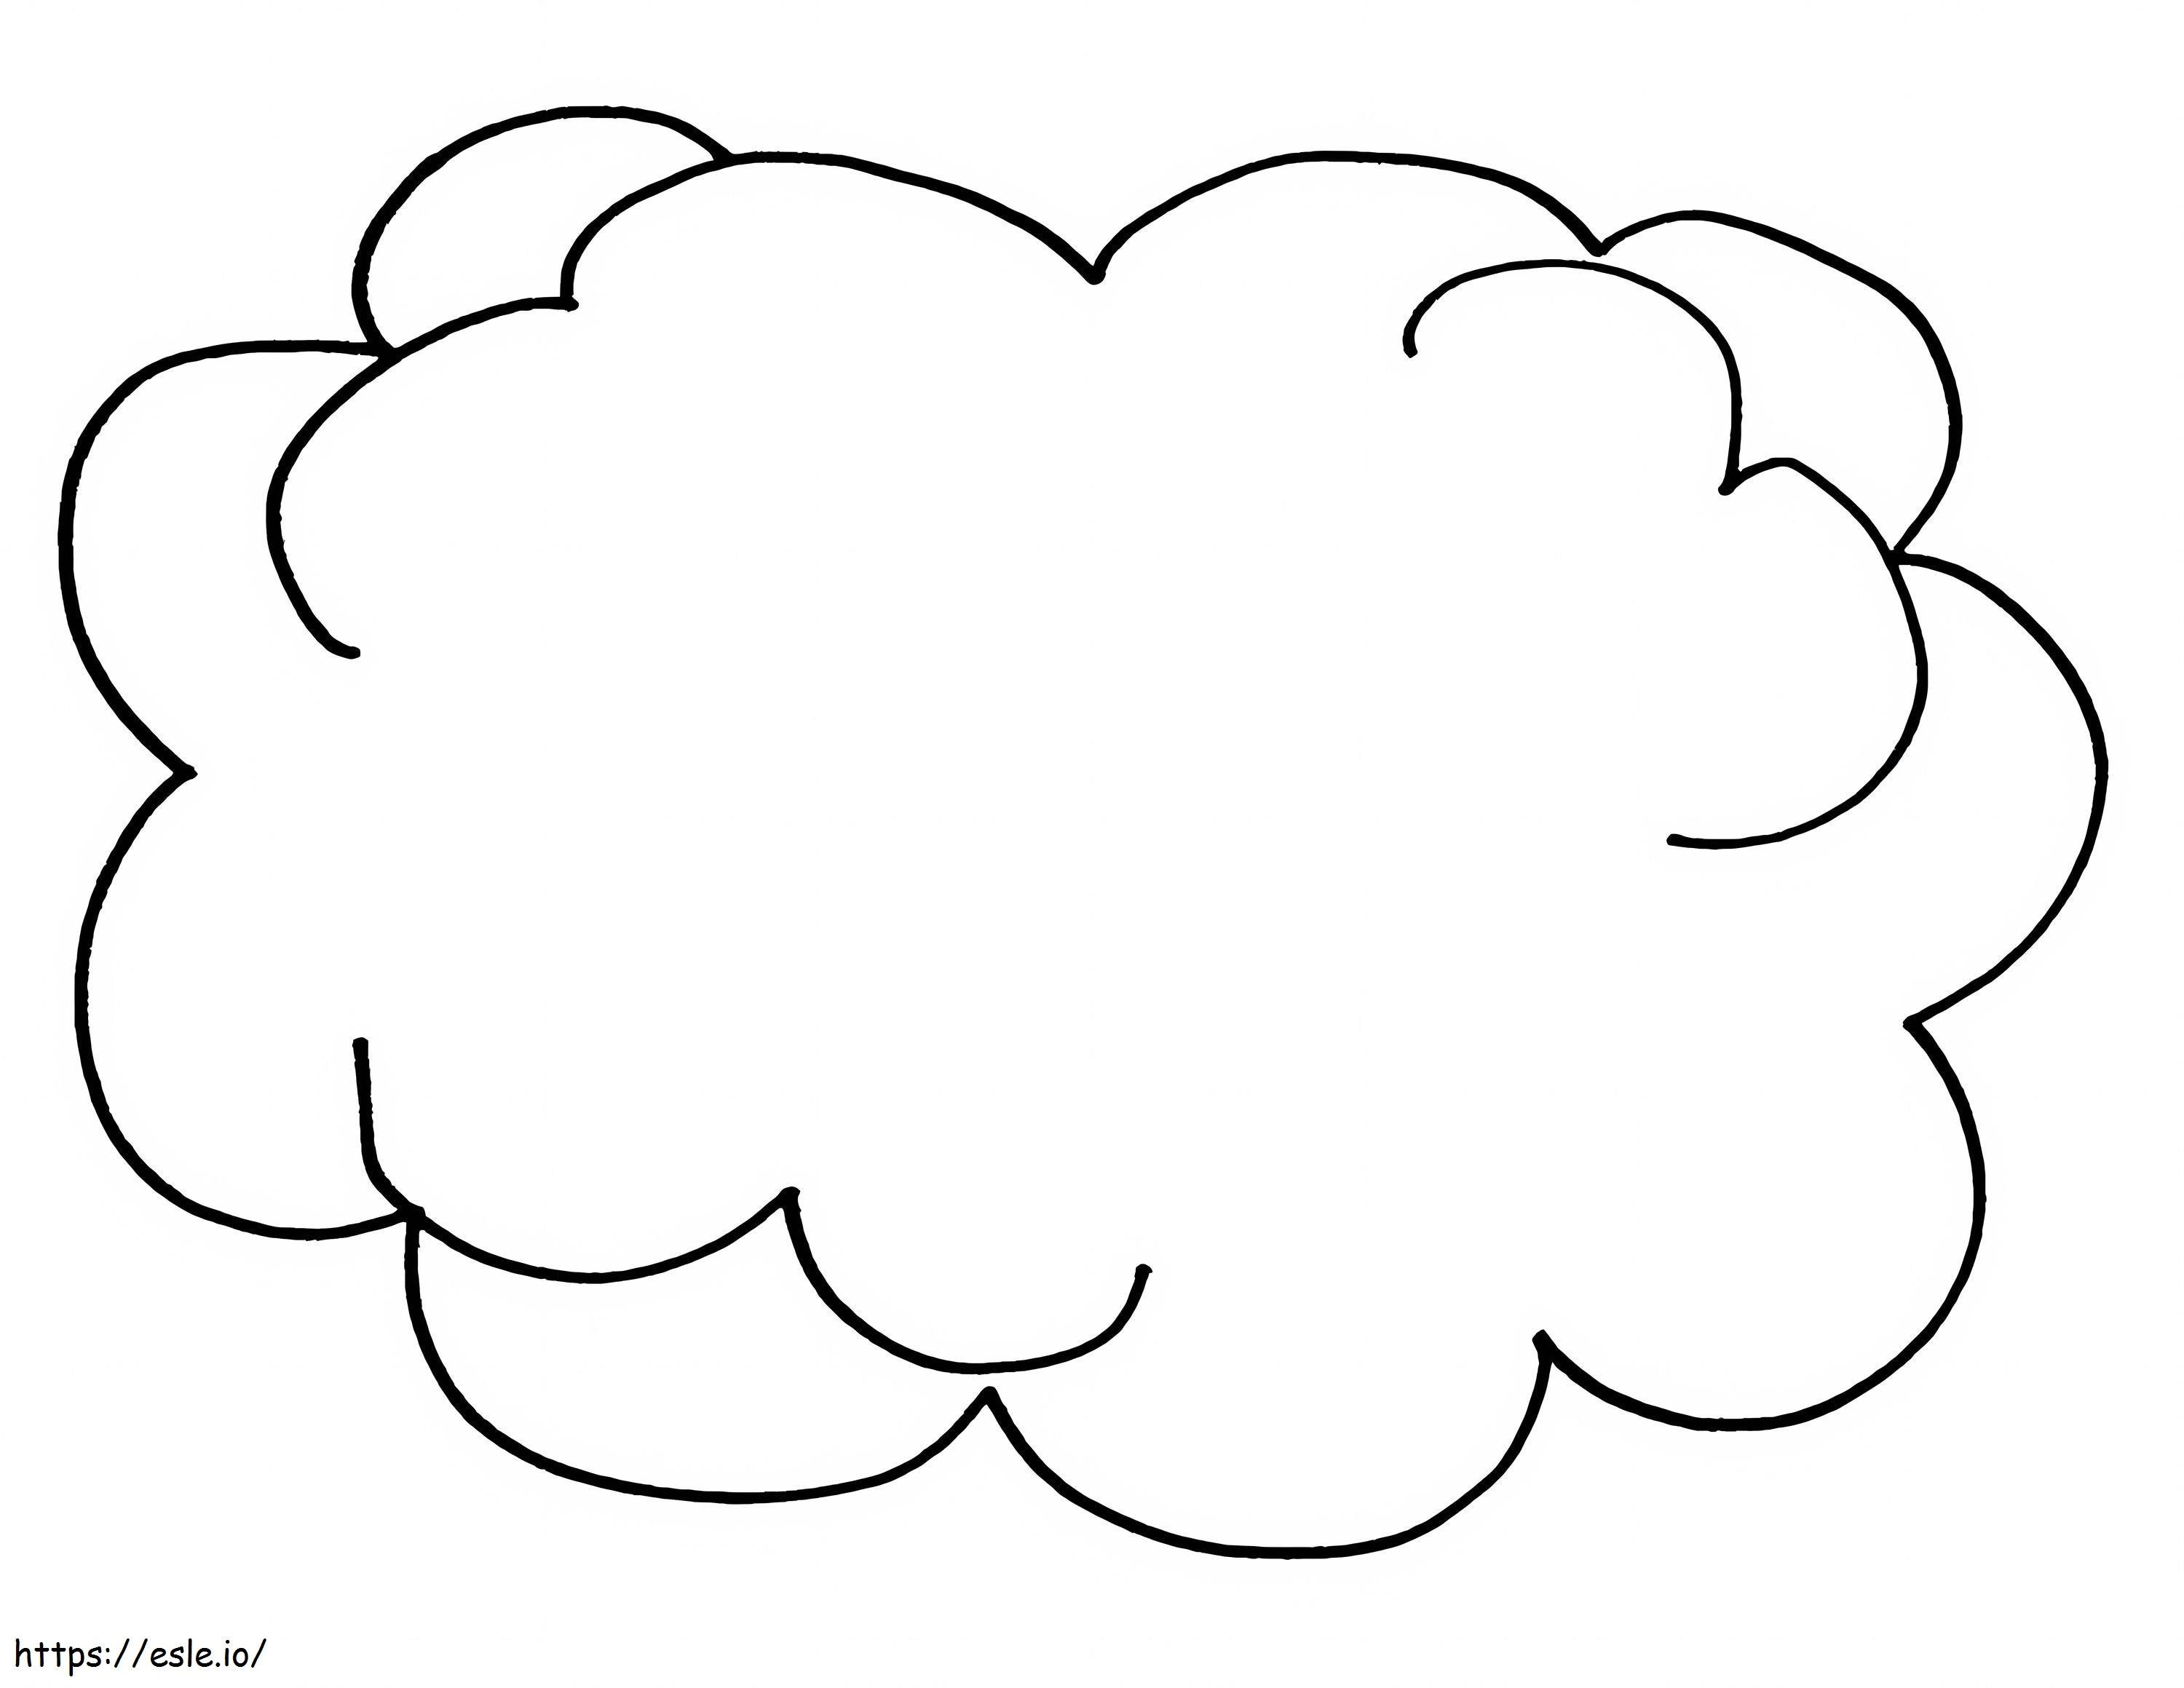 Normal Cloud coloring page